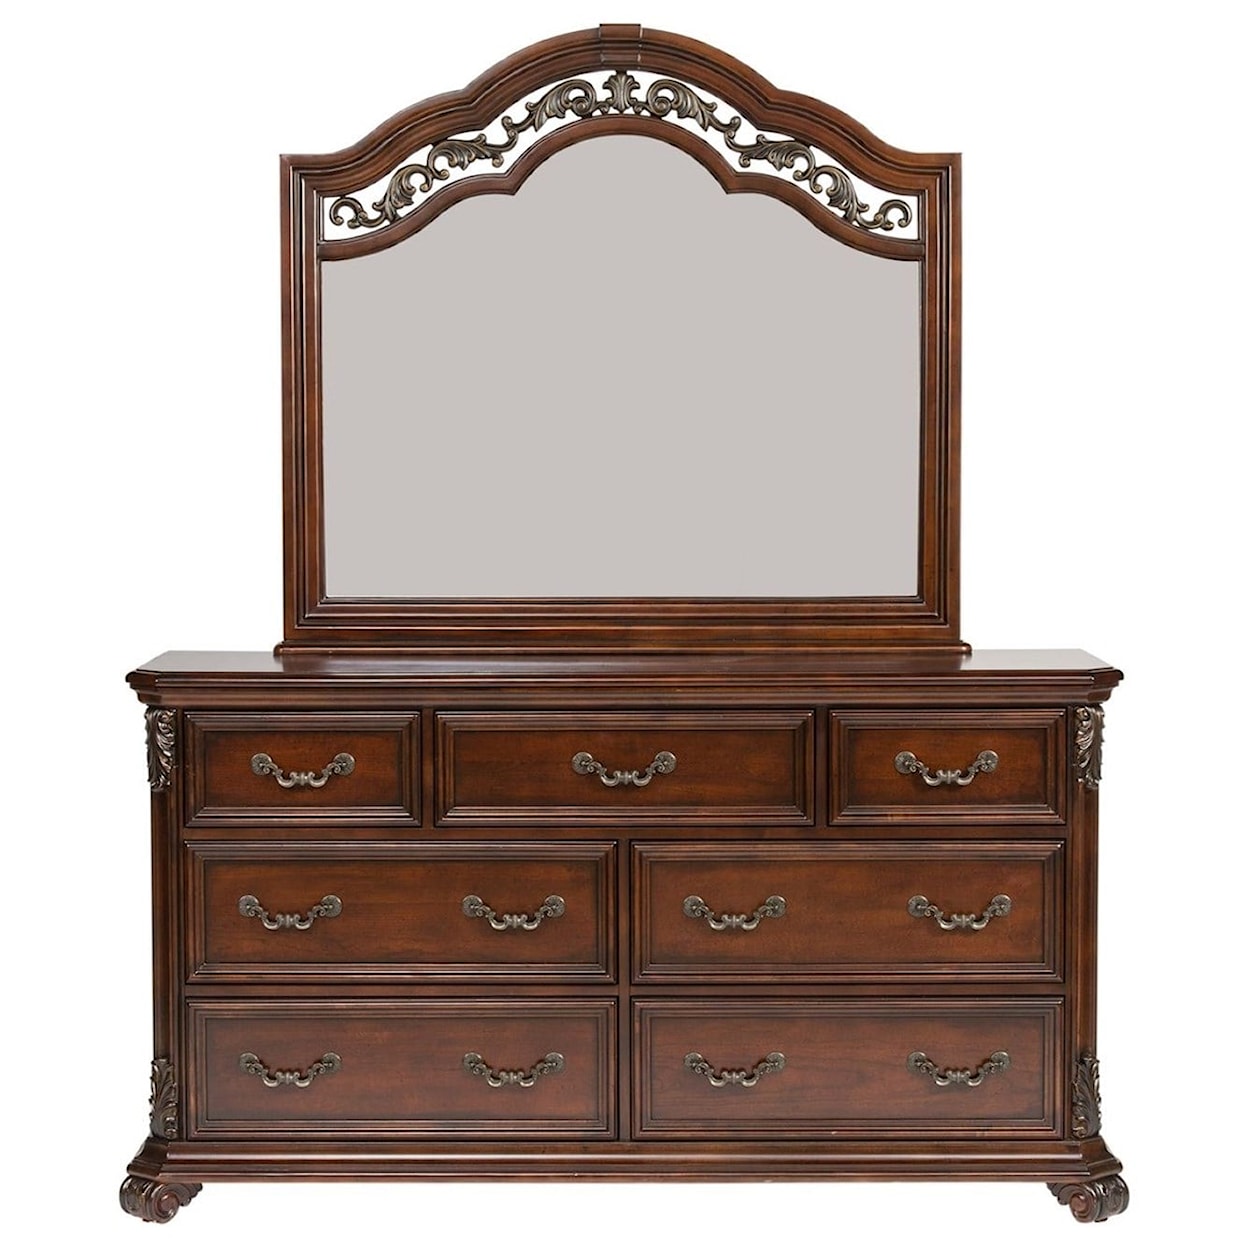 Libby Lenor 7-Drawer Dresser with Arched Mirror